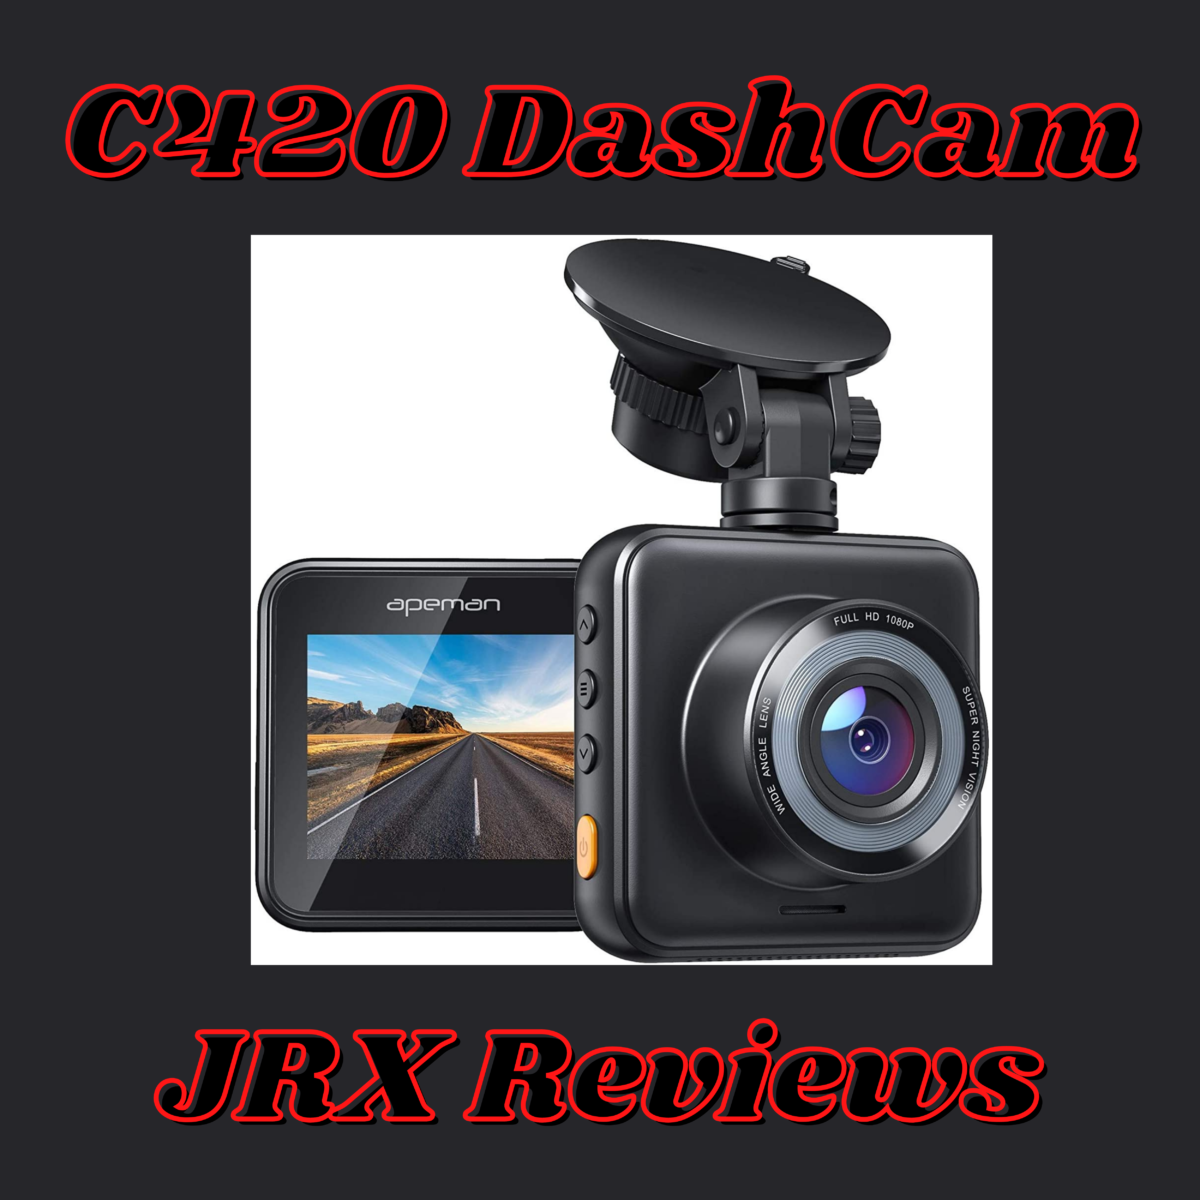 C420 Dashcam by Apeman Thoughts